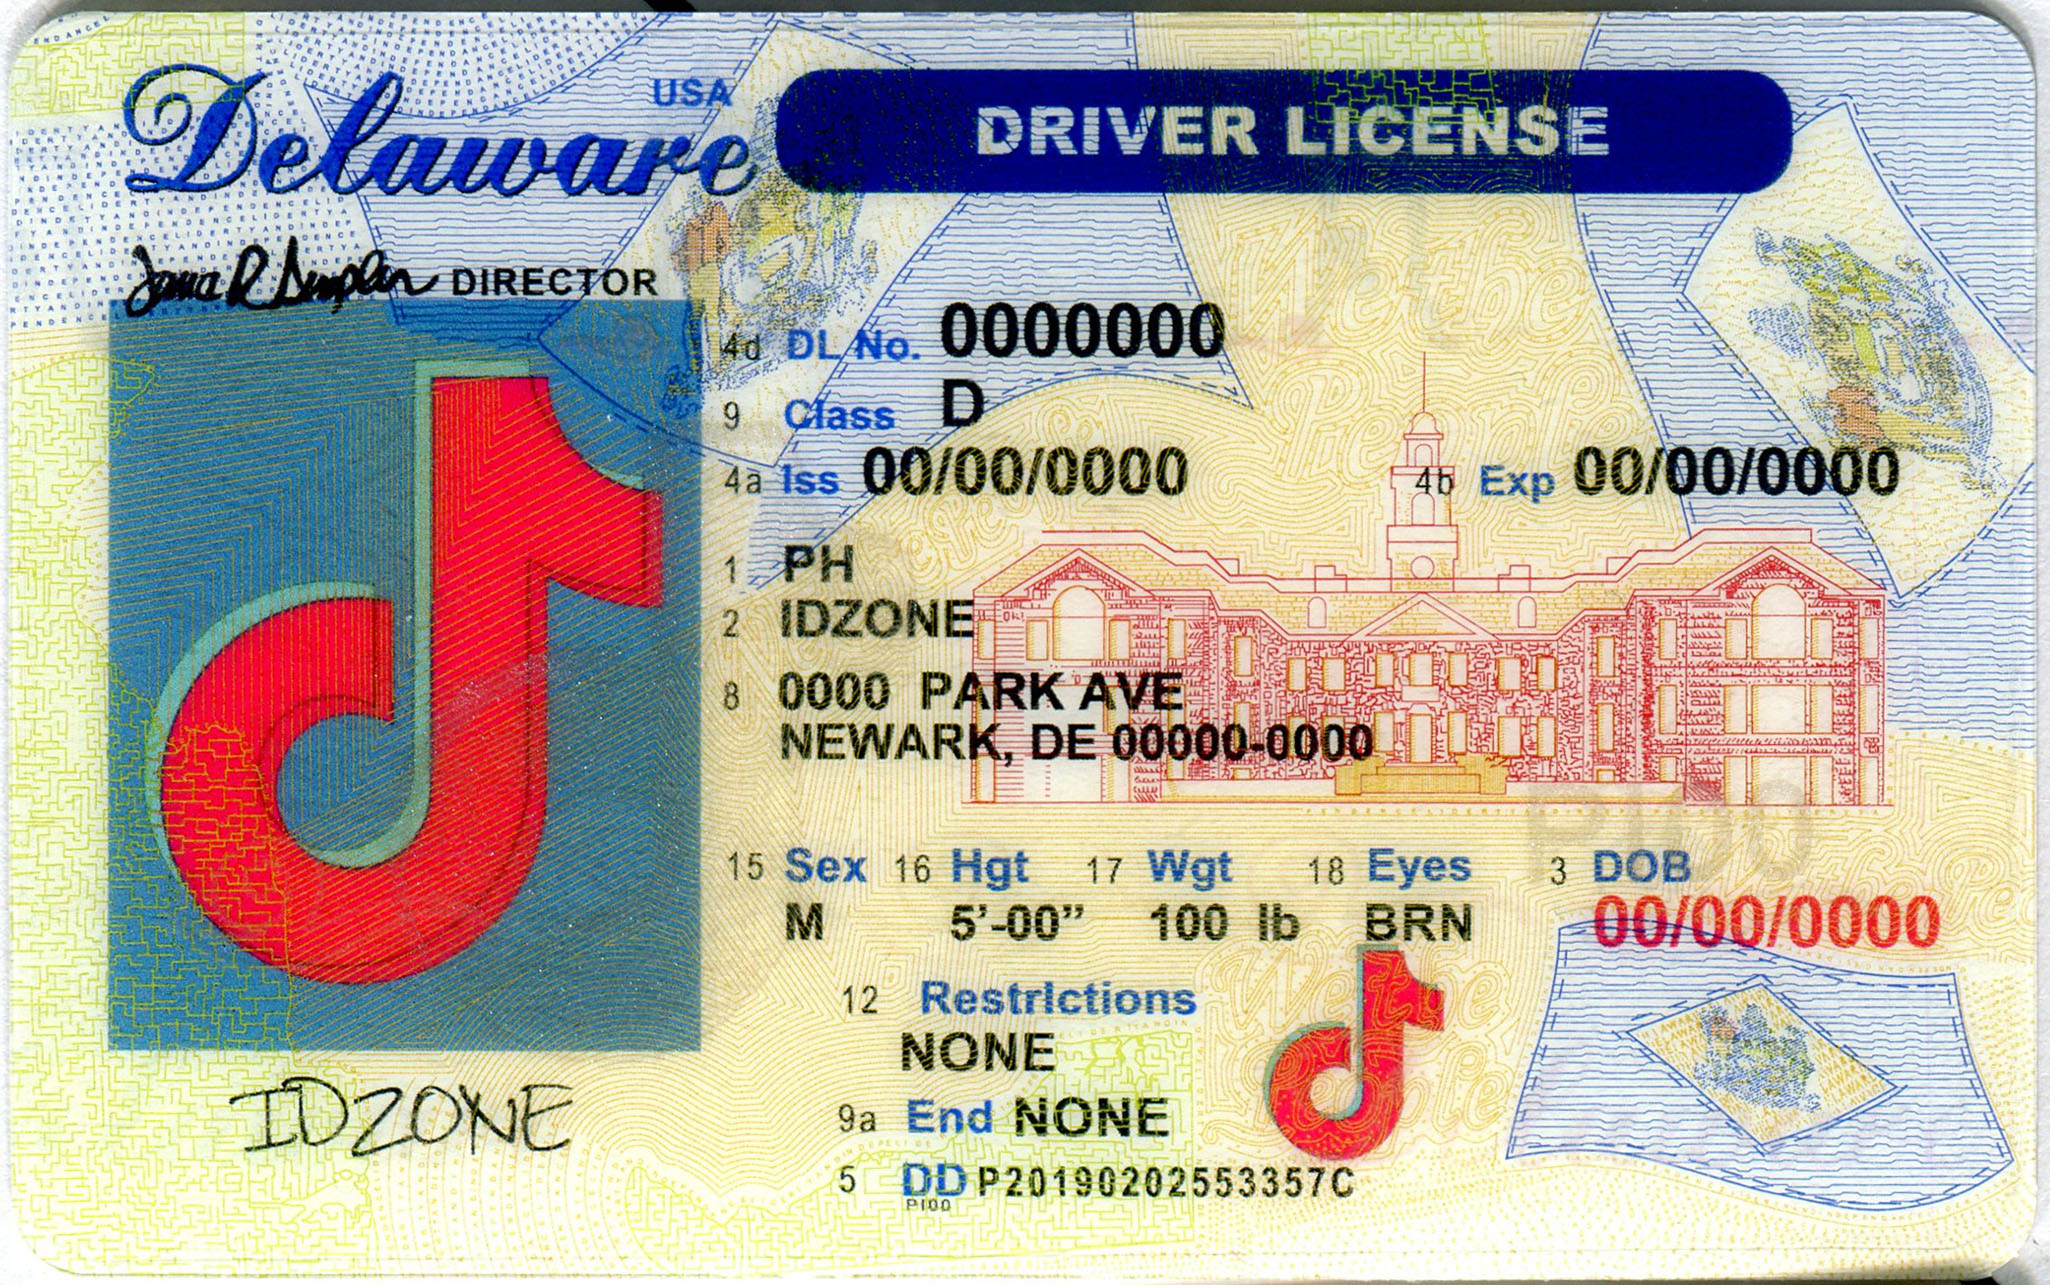 DELAWARE-New Scannable fake id